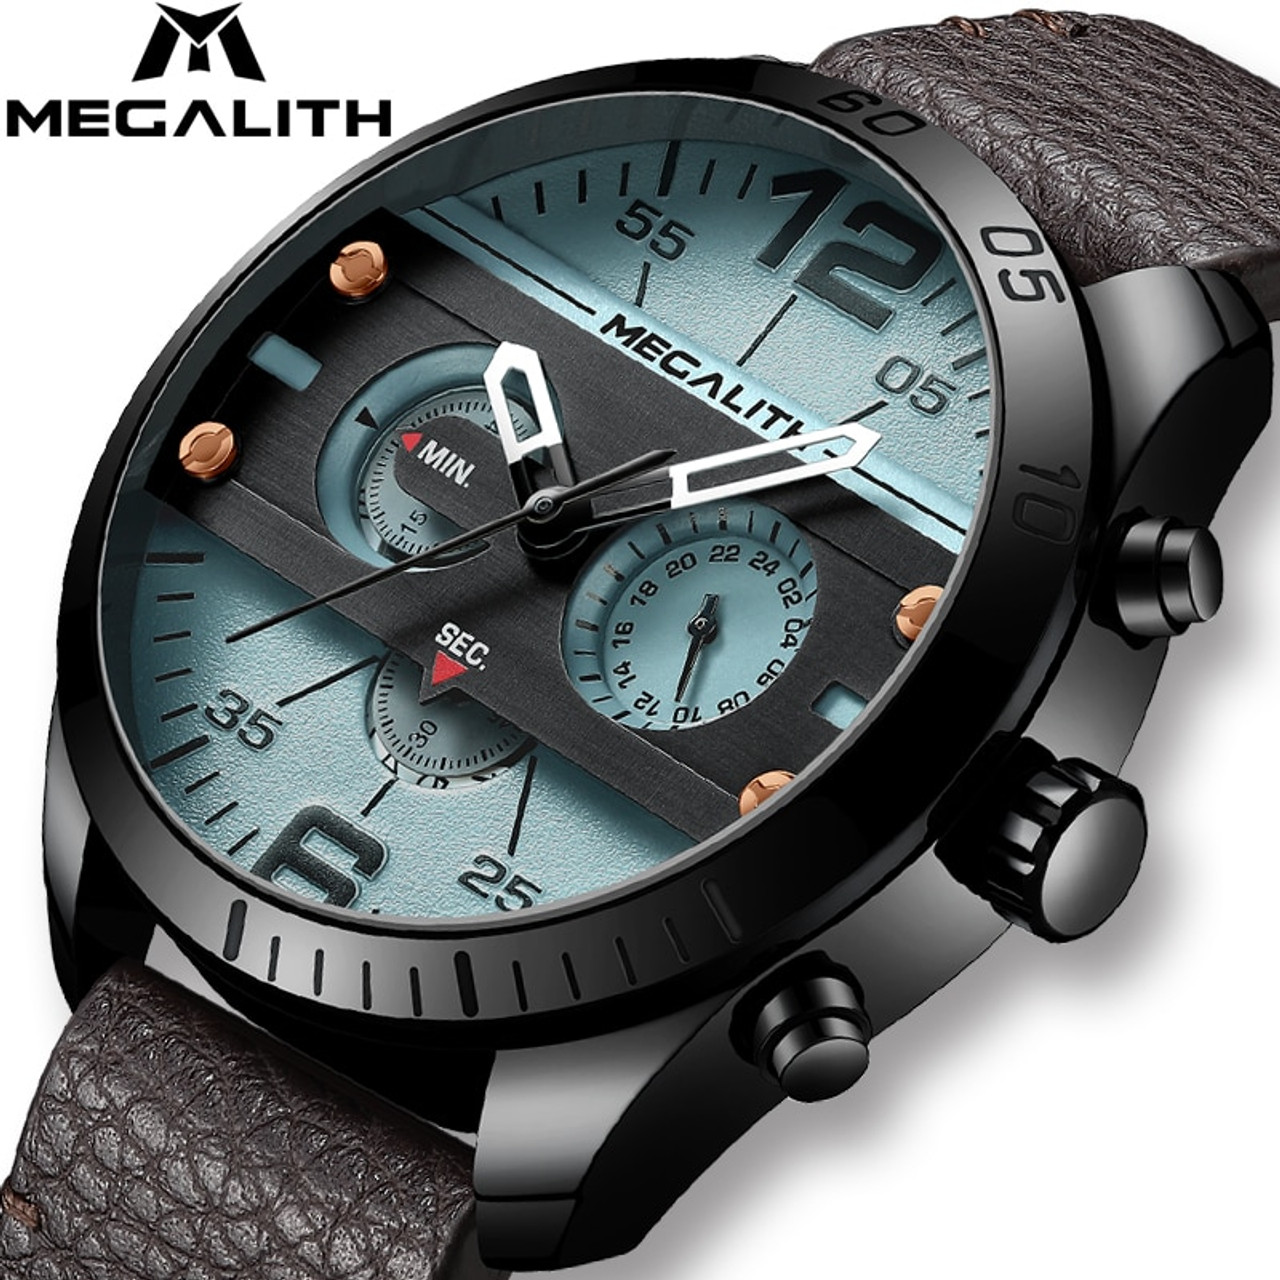 OVERFLY Luxury Chronograph Watch for Men's - MEGALITH NOW IN INDIA  (6381-Black)